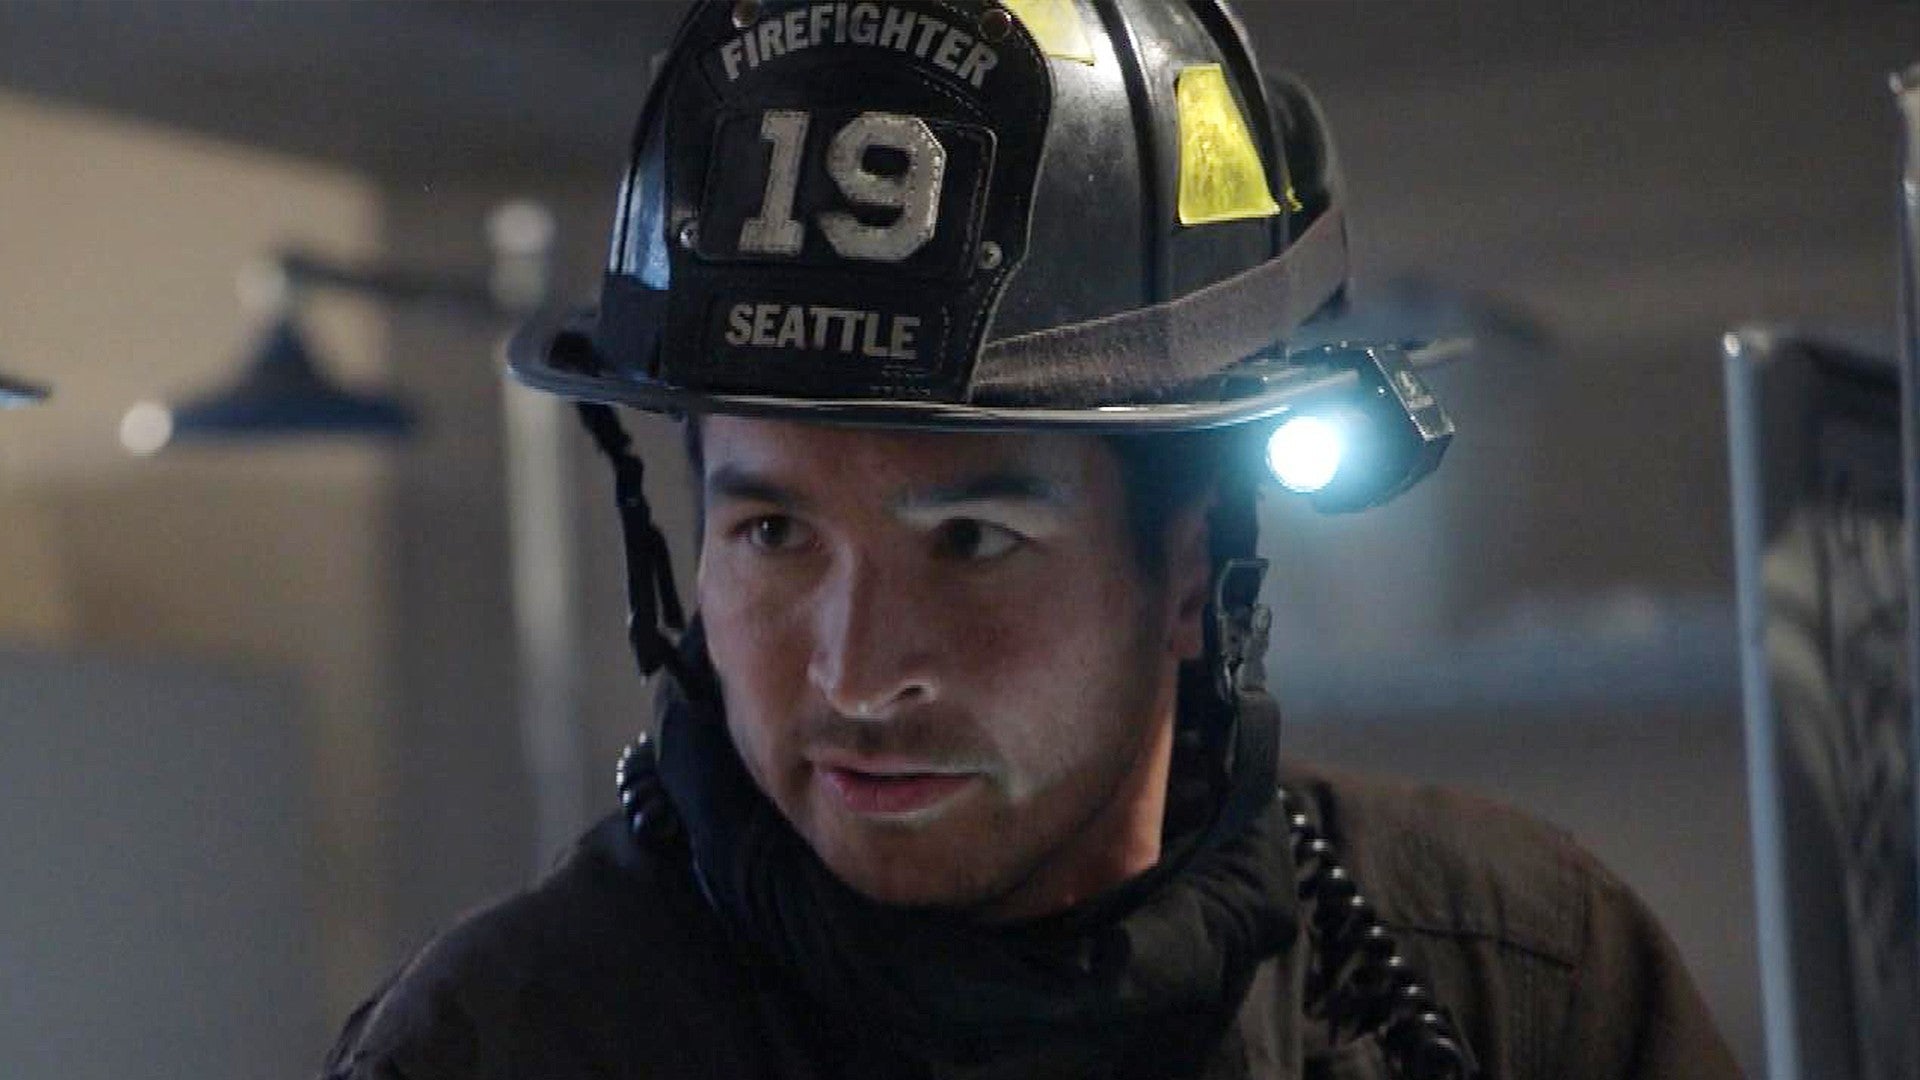 'Station 19' An Explosion at PacNorth Rocks the Team in Season 3